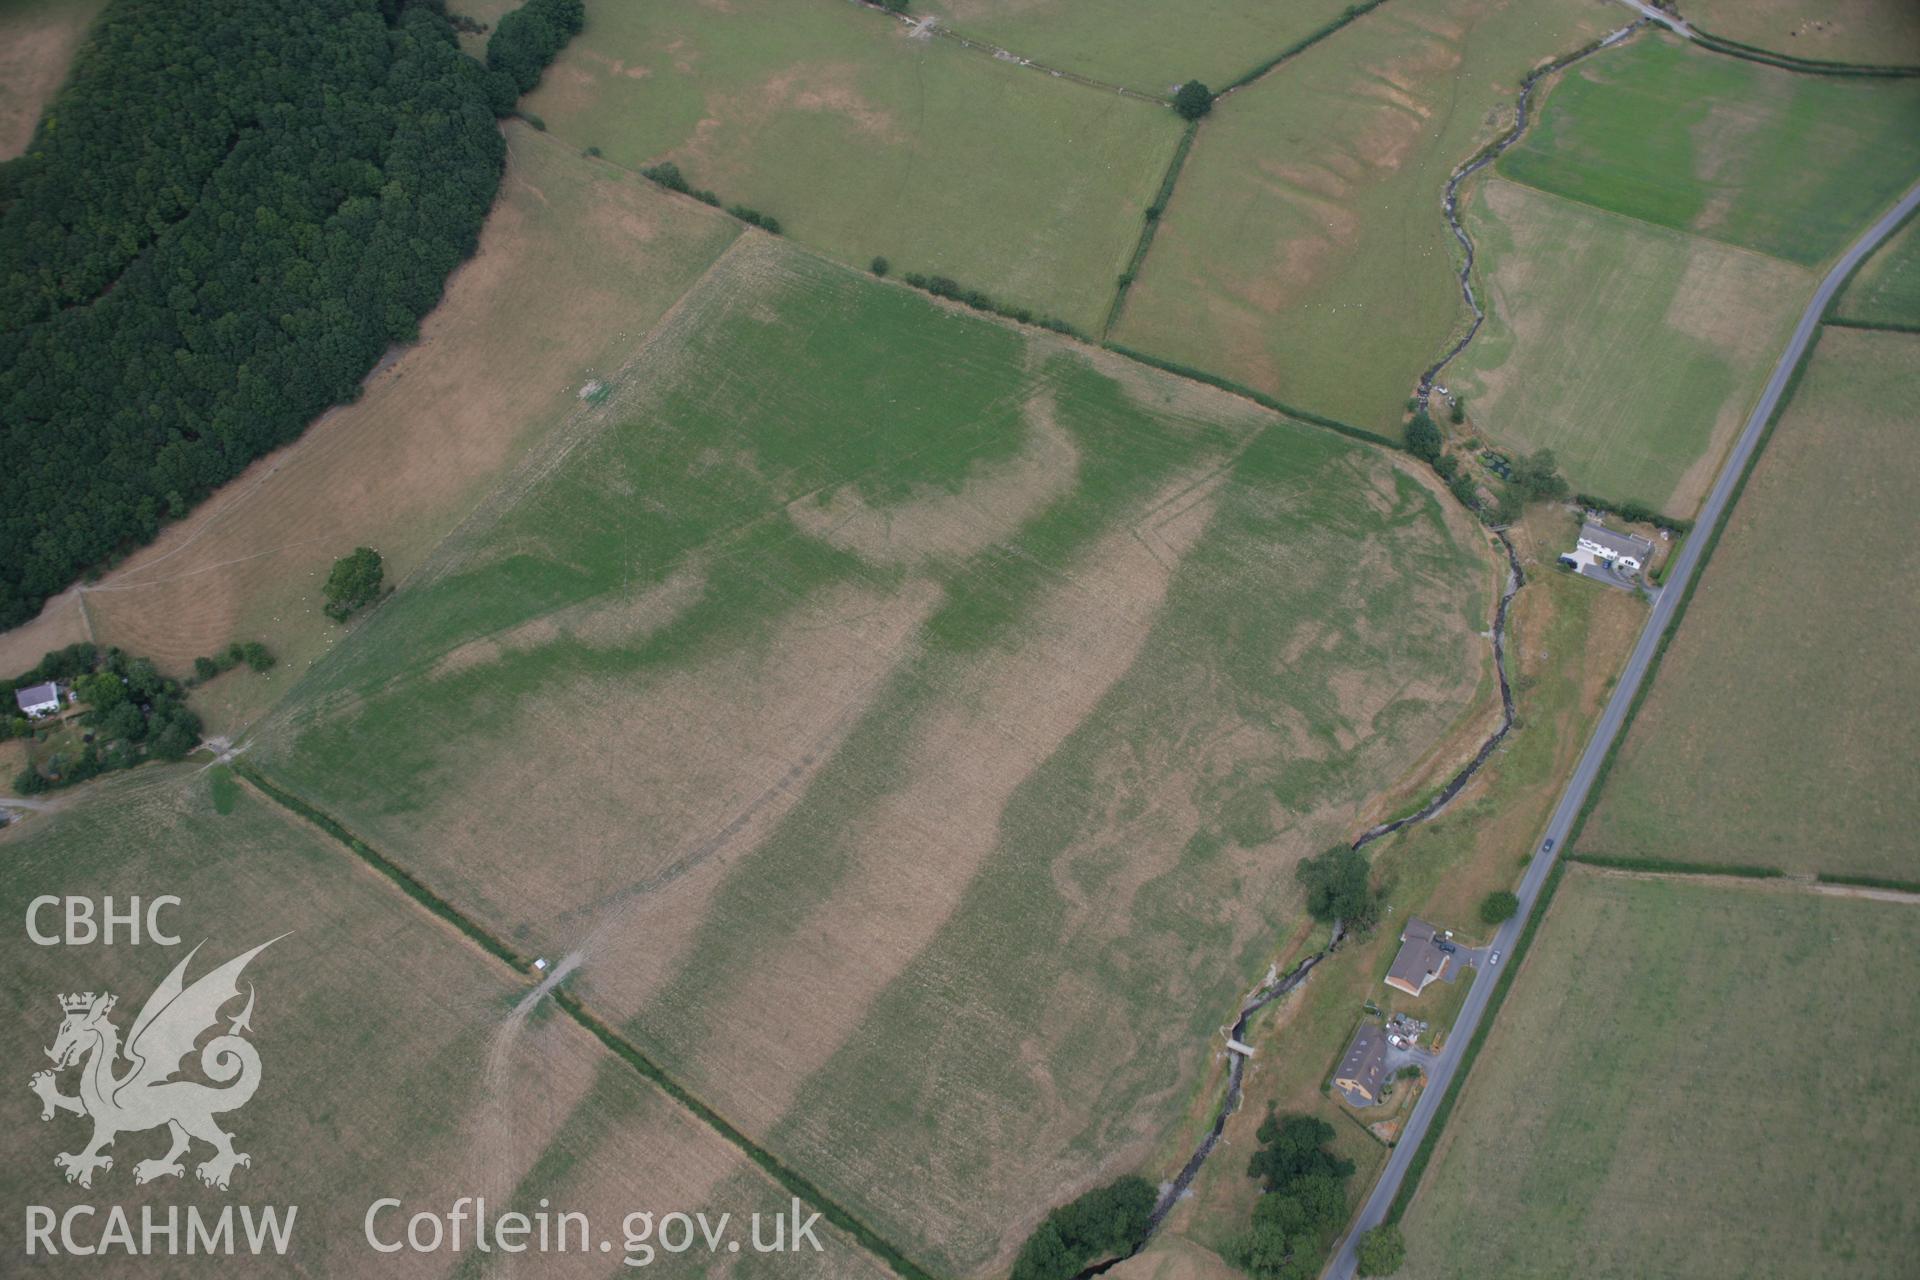 RCAHMW colour oblique aerial photograph of the possible Roman Villa site at Nant Magwr, Abermagwr. Taken on 27 July 2006 by Toby Driver